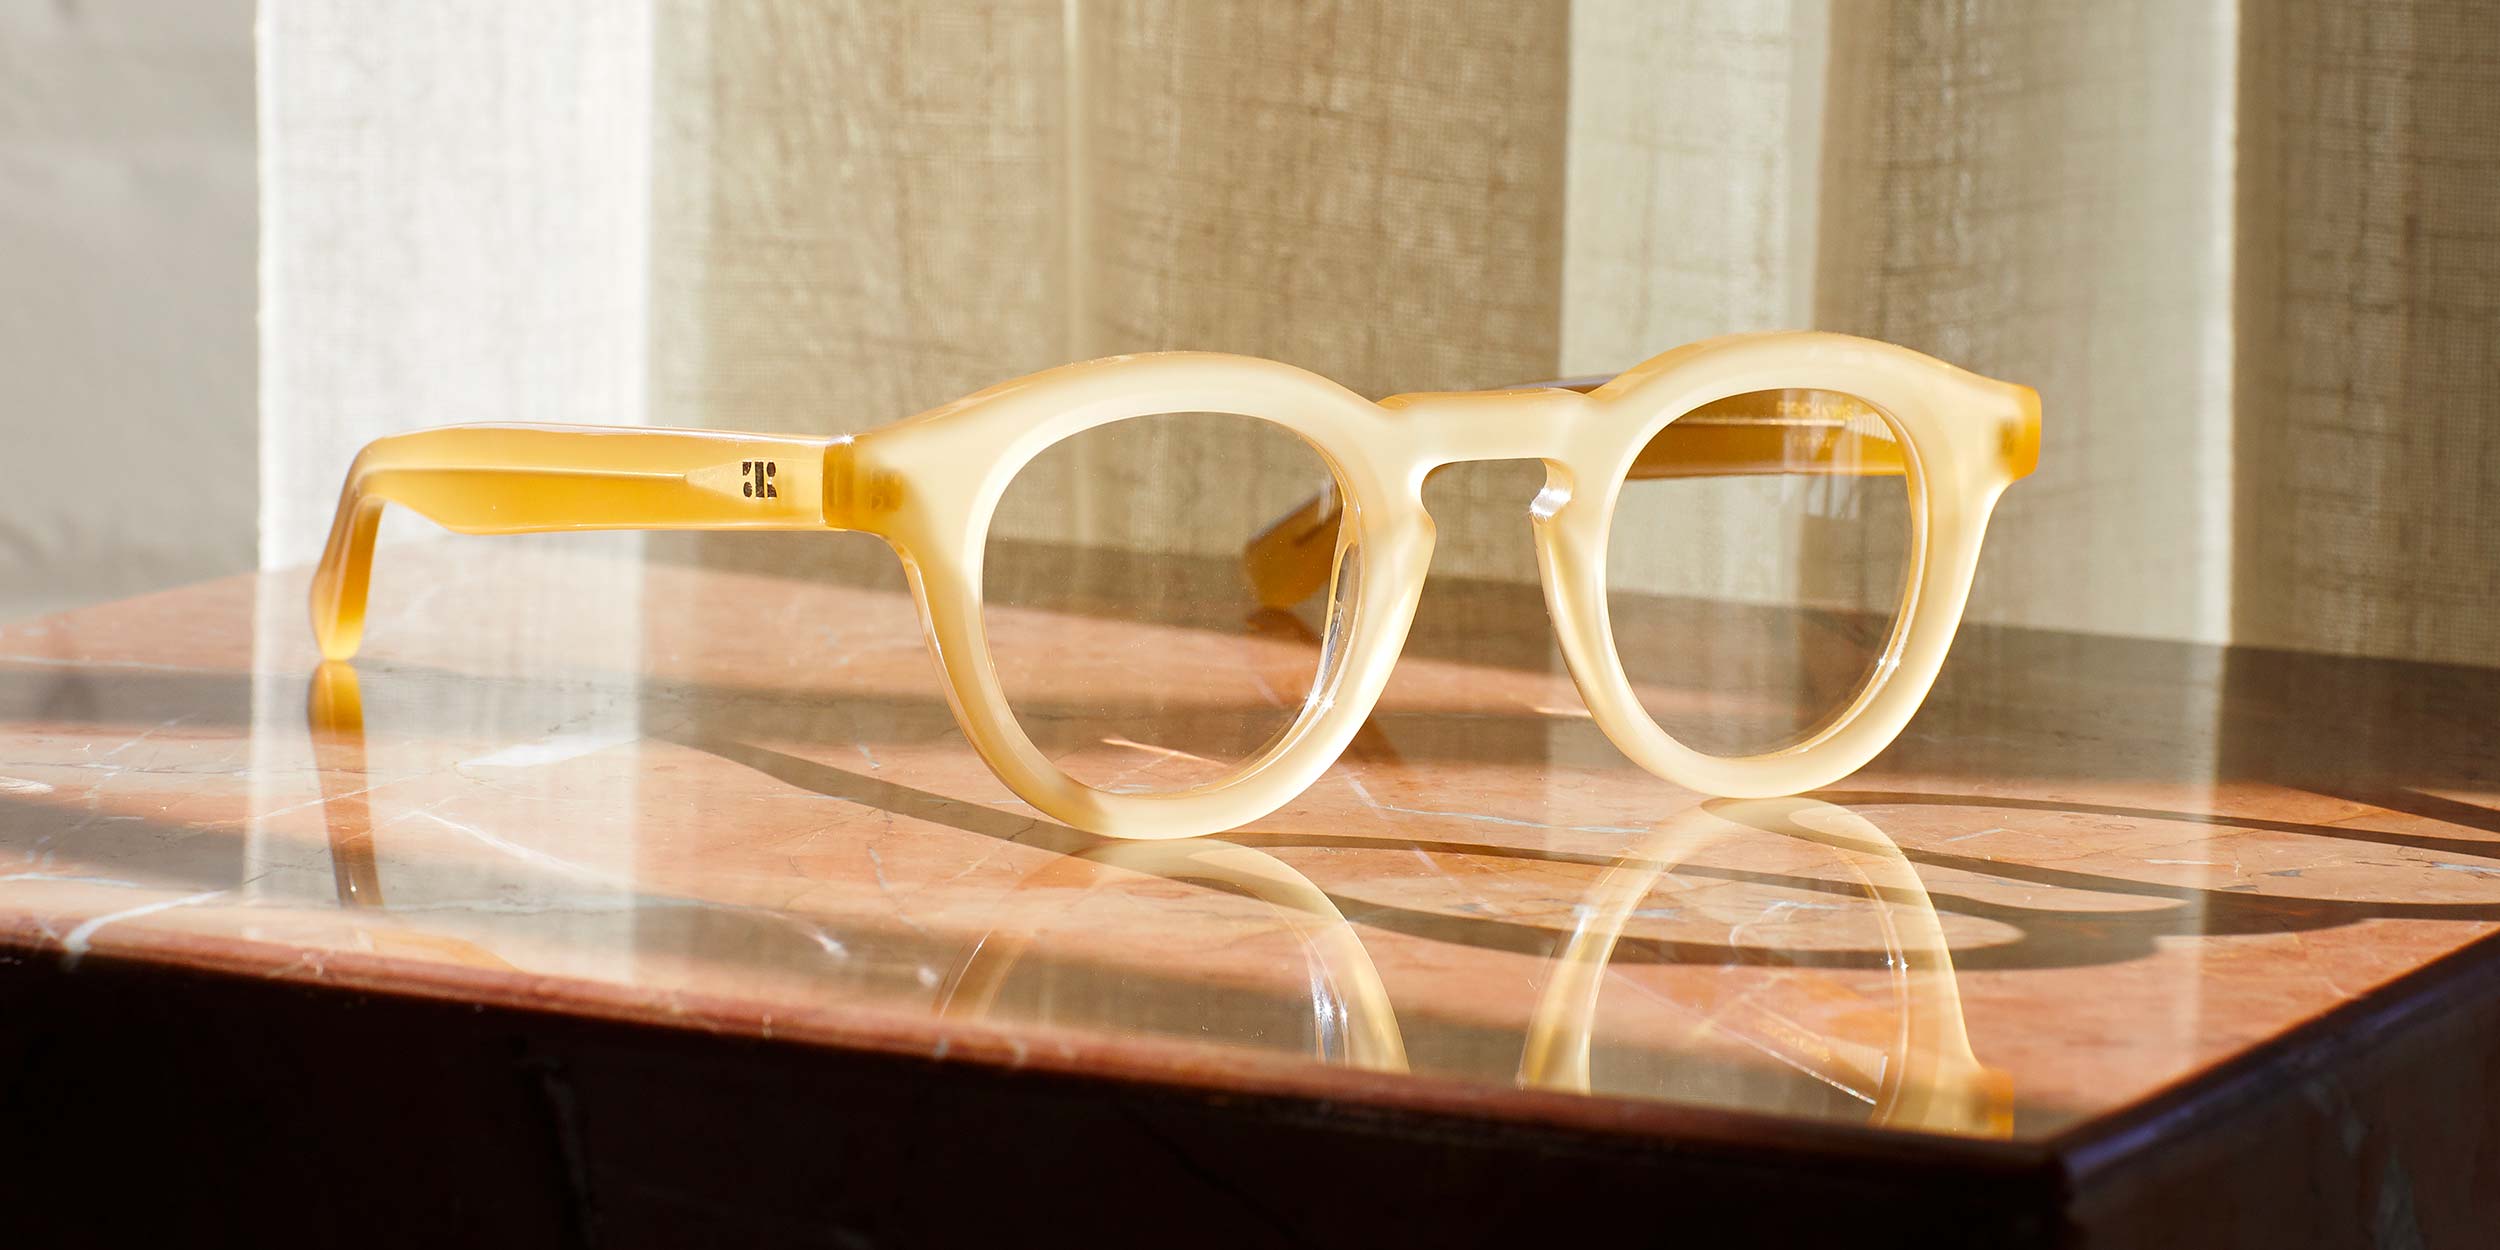 Photo Details of Jude Honey Tortoise Reading Glasses in a room